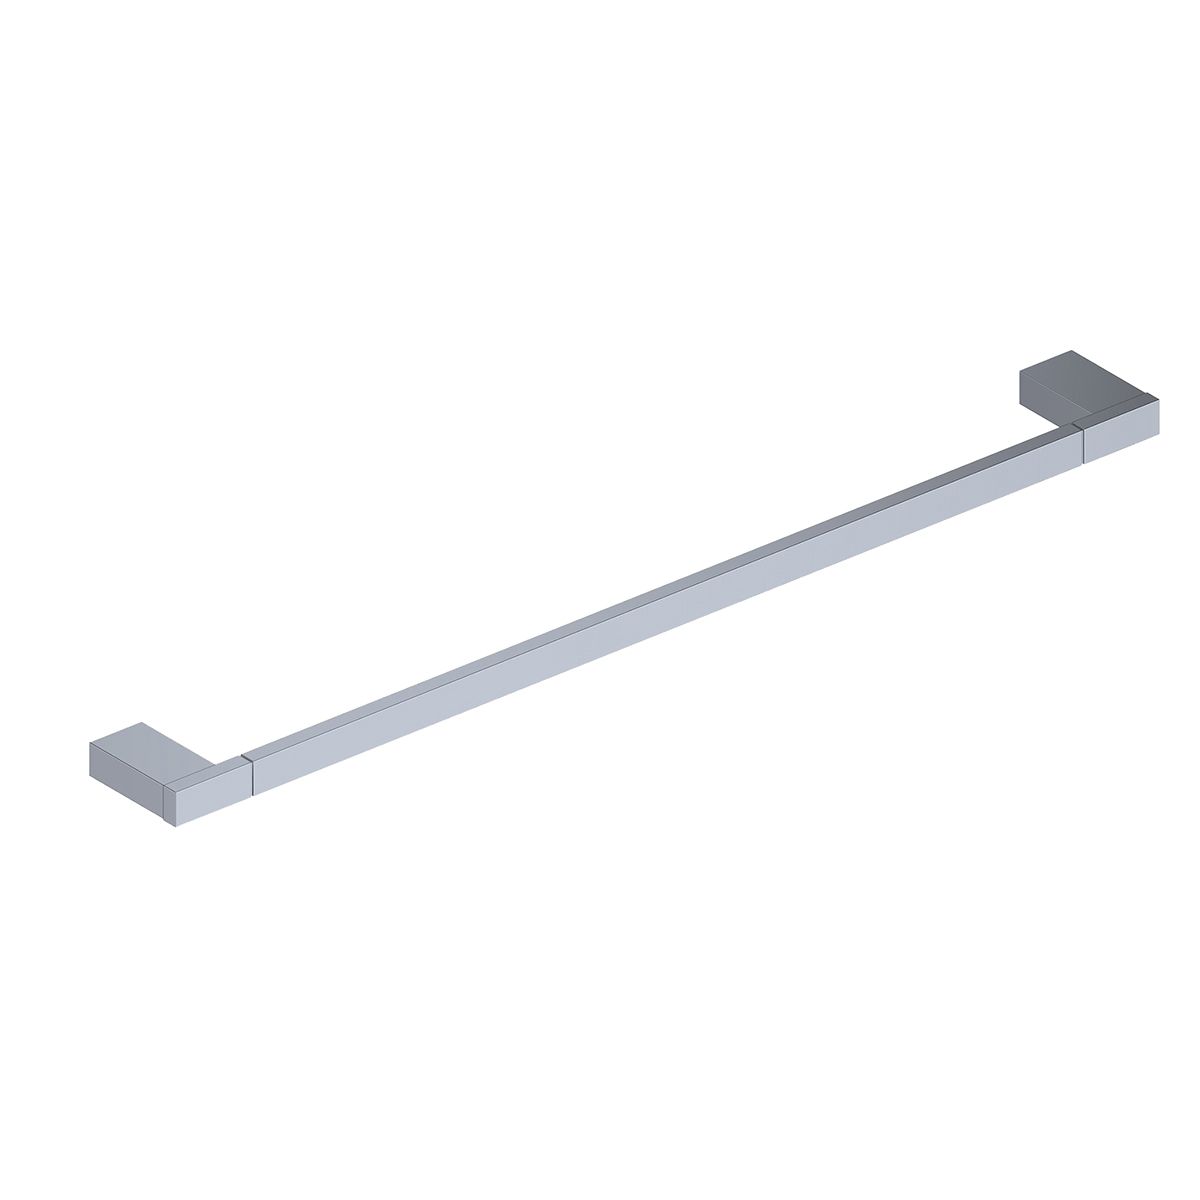 What is Considered a Standard Towel Bar Size?